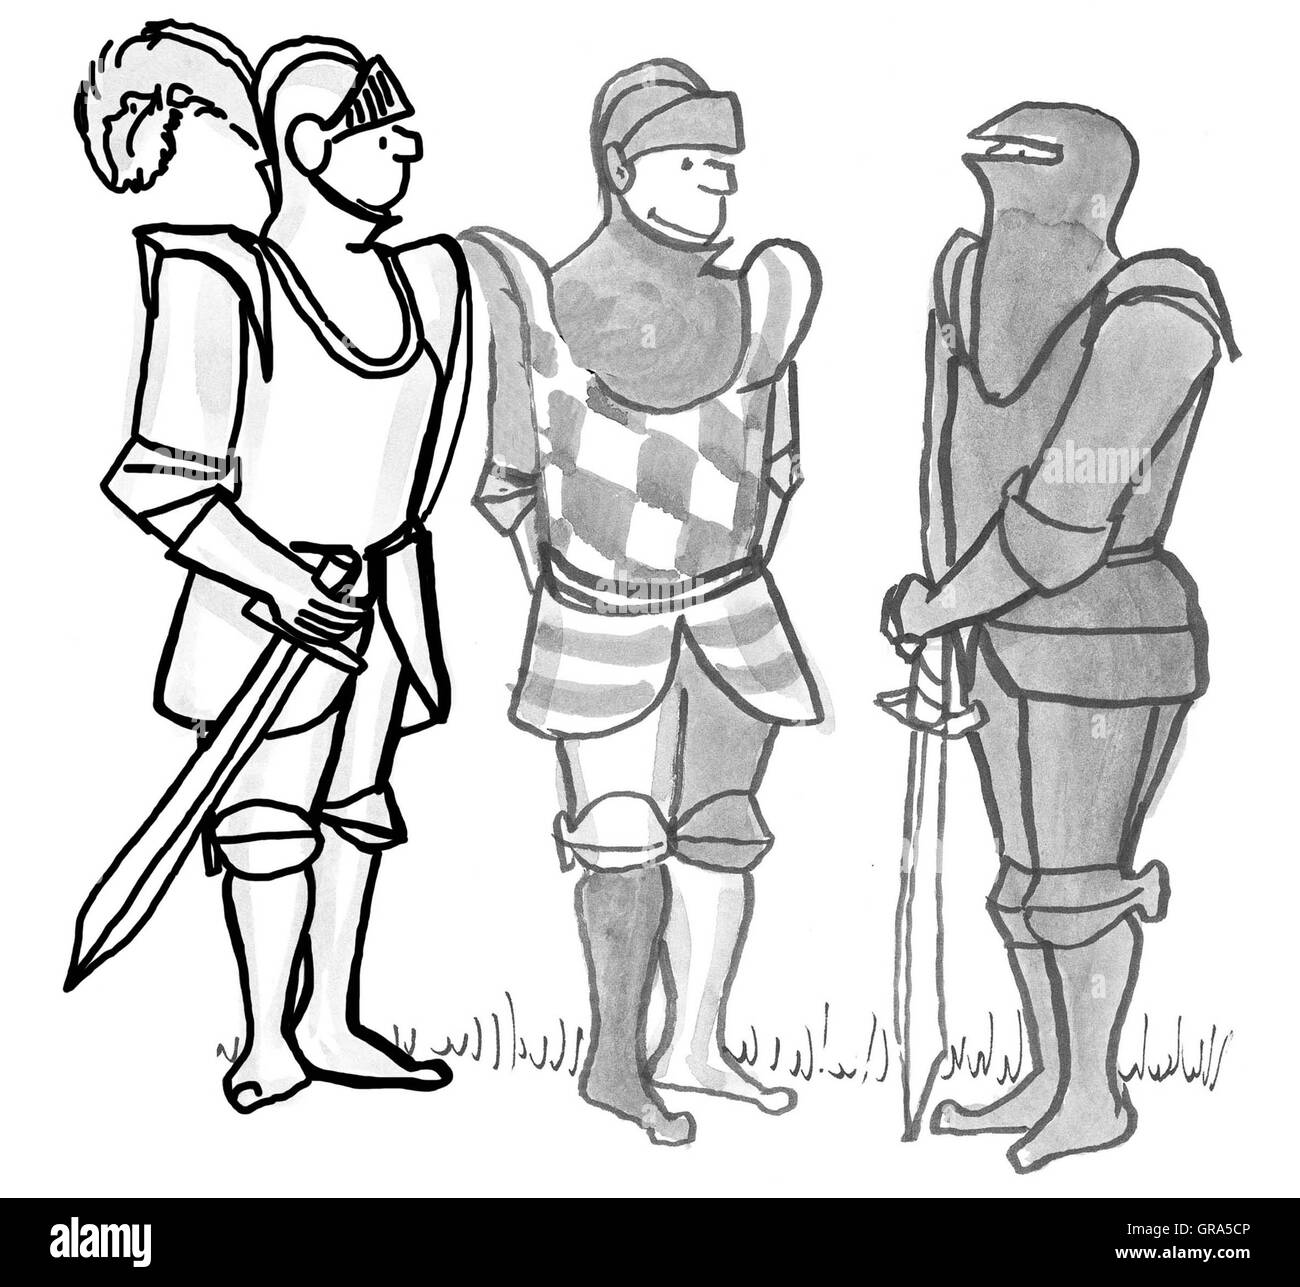 Illustration of three knights wearing armor and holding swords. Stock Photo